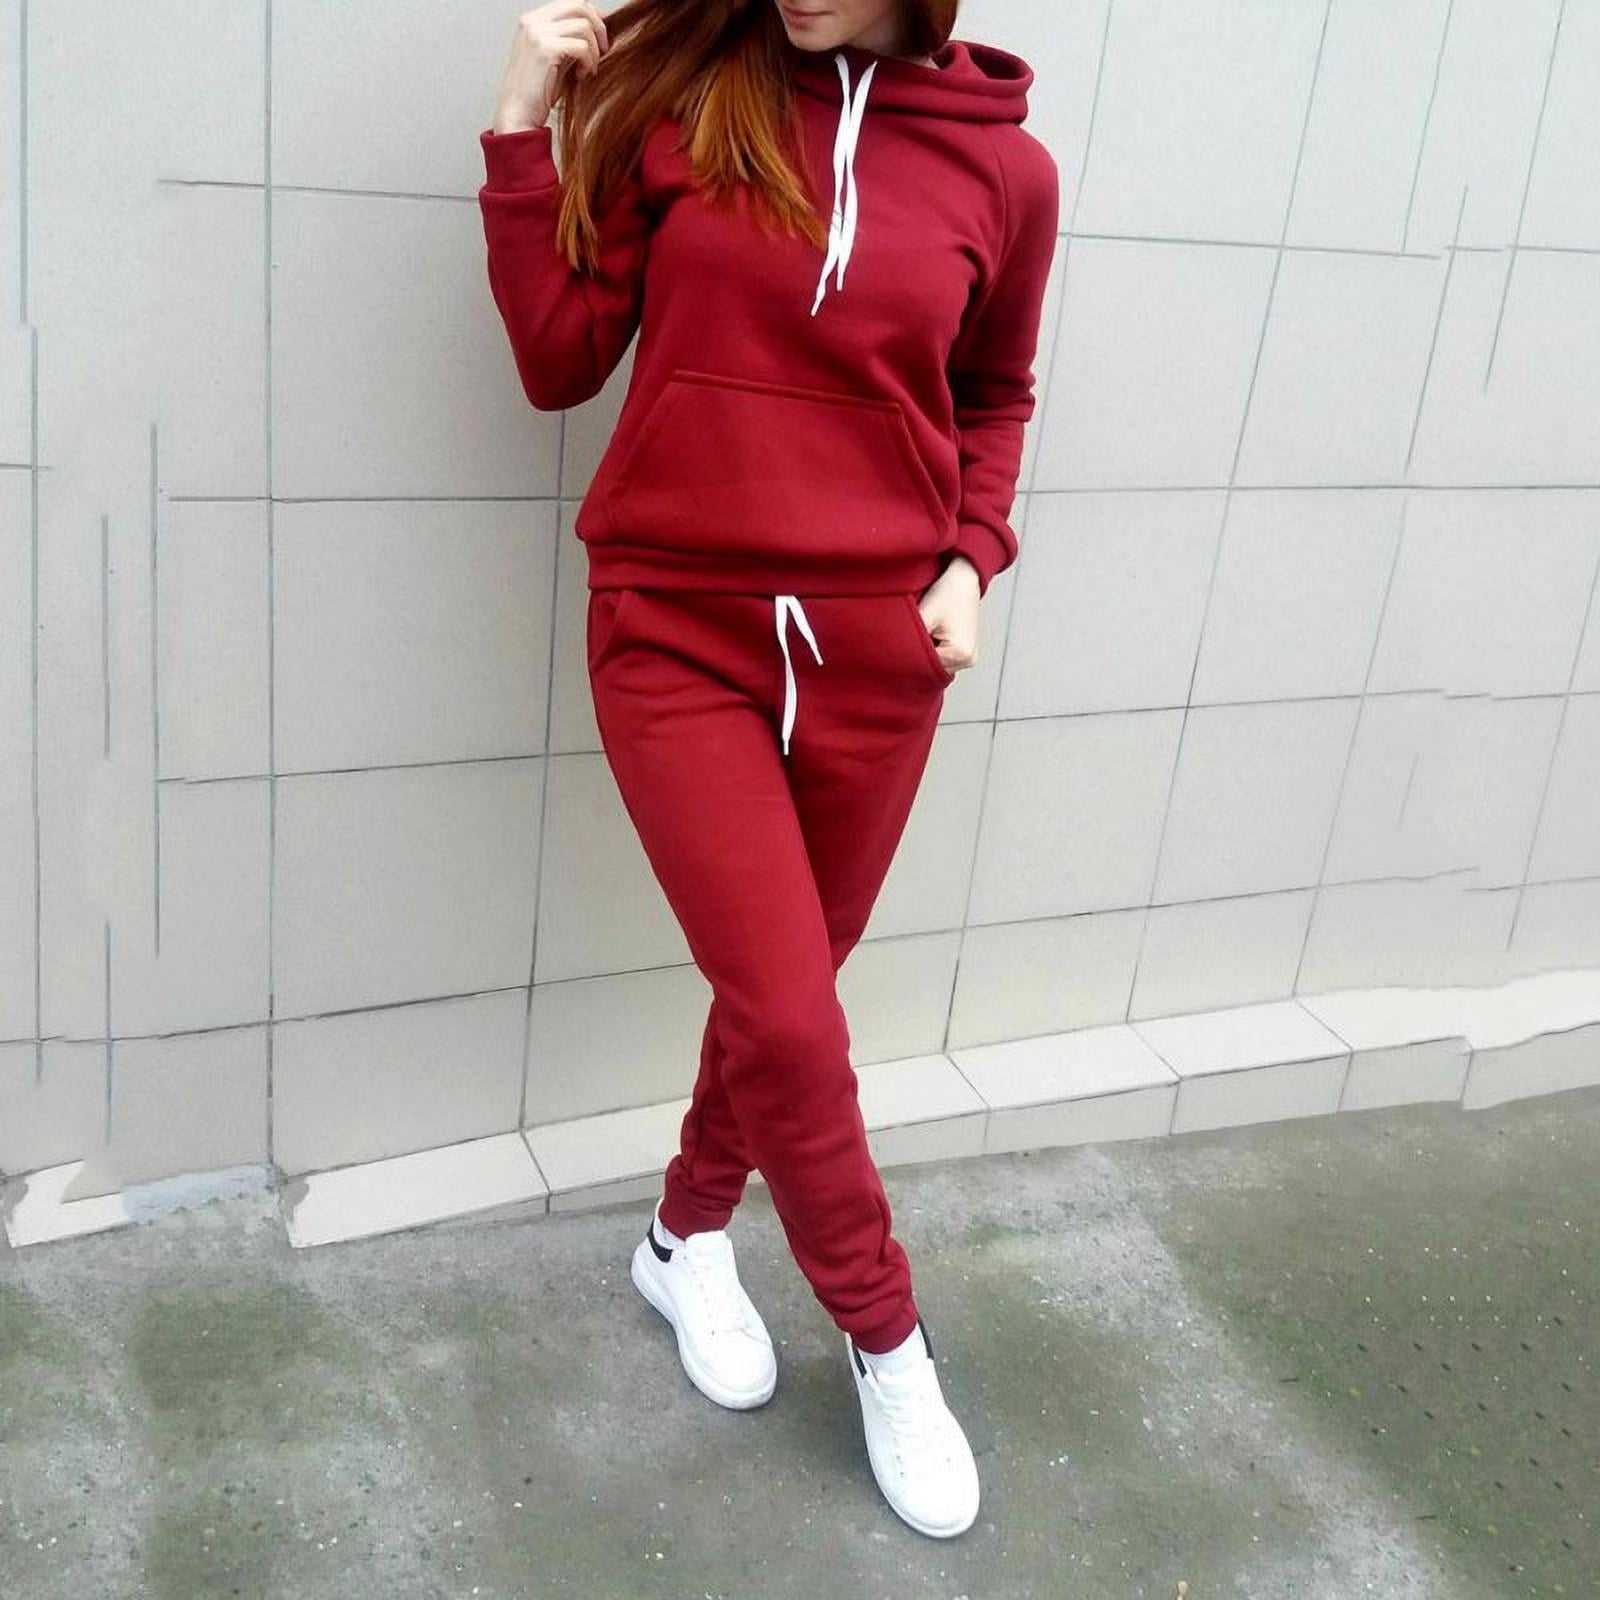 Sporty New Women's O Neck Solid Color Short Sleeves Casual Jogging Outfits 2pcs 